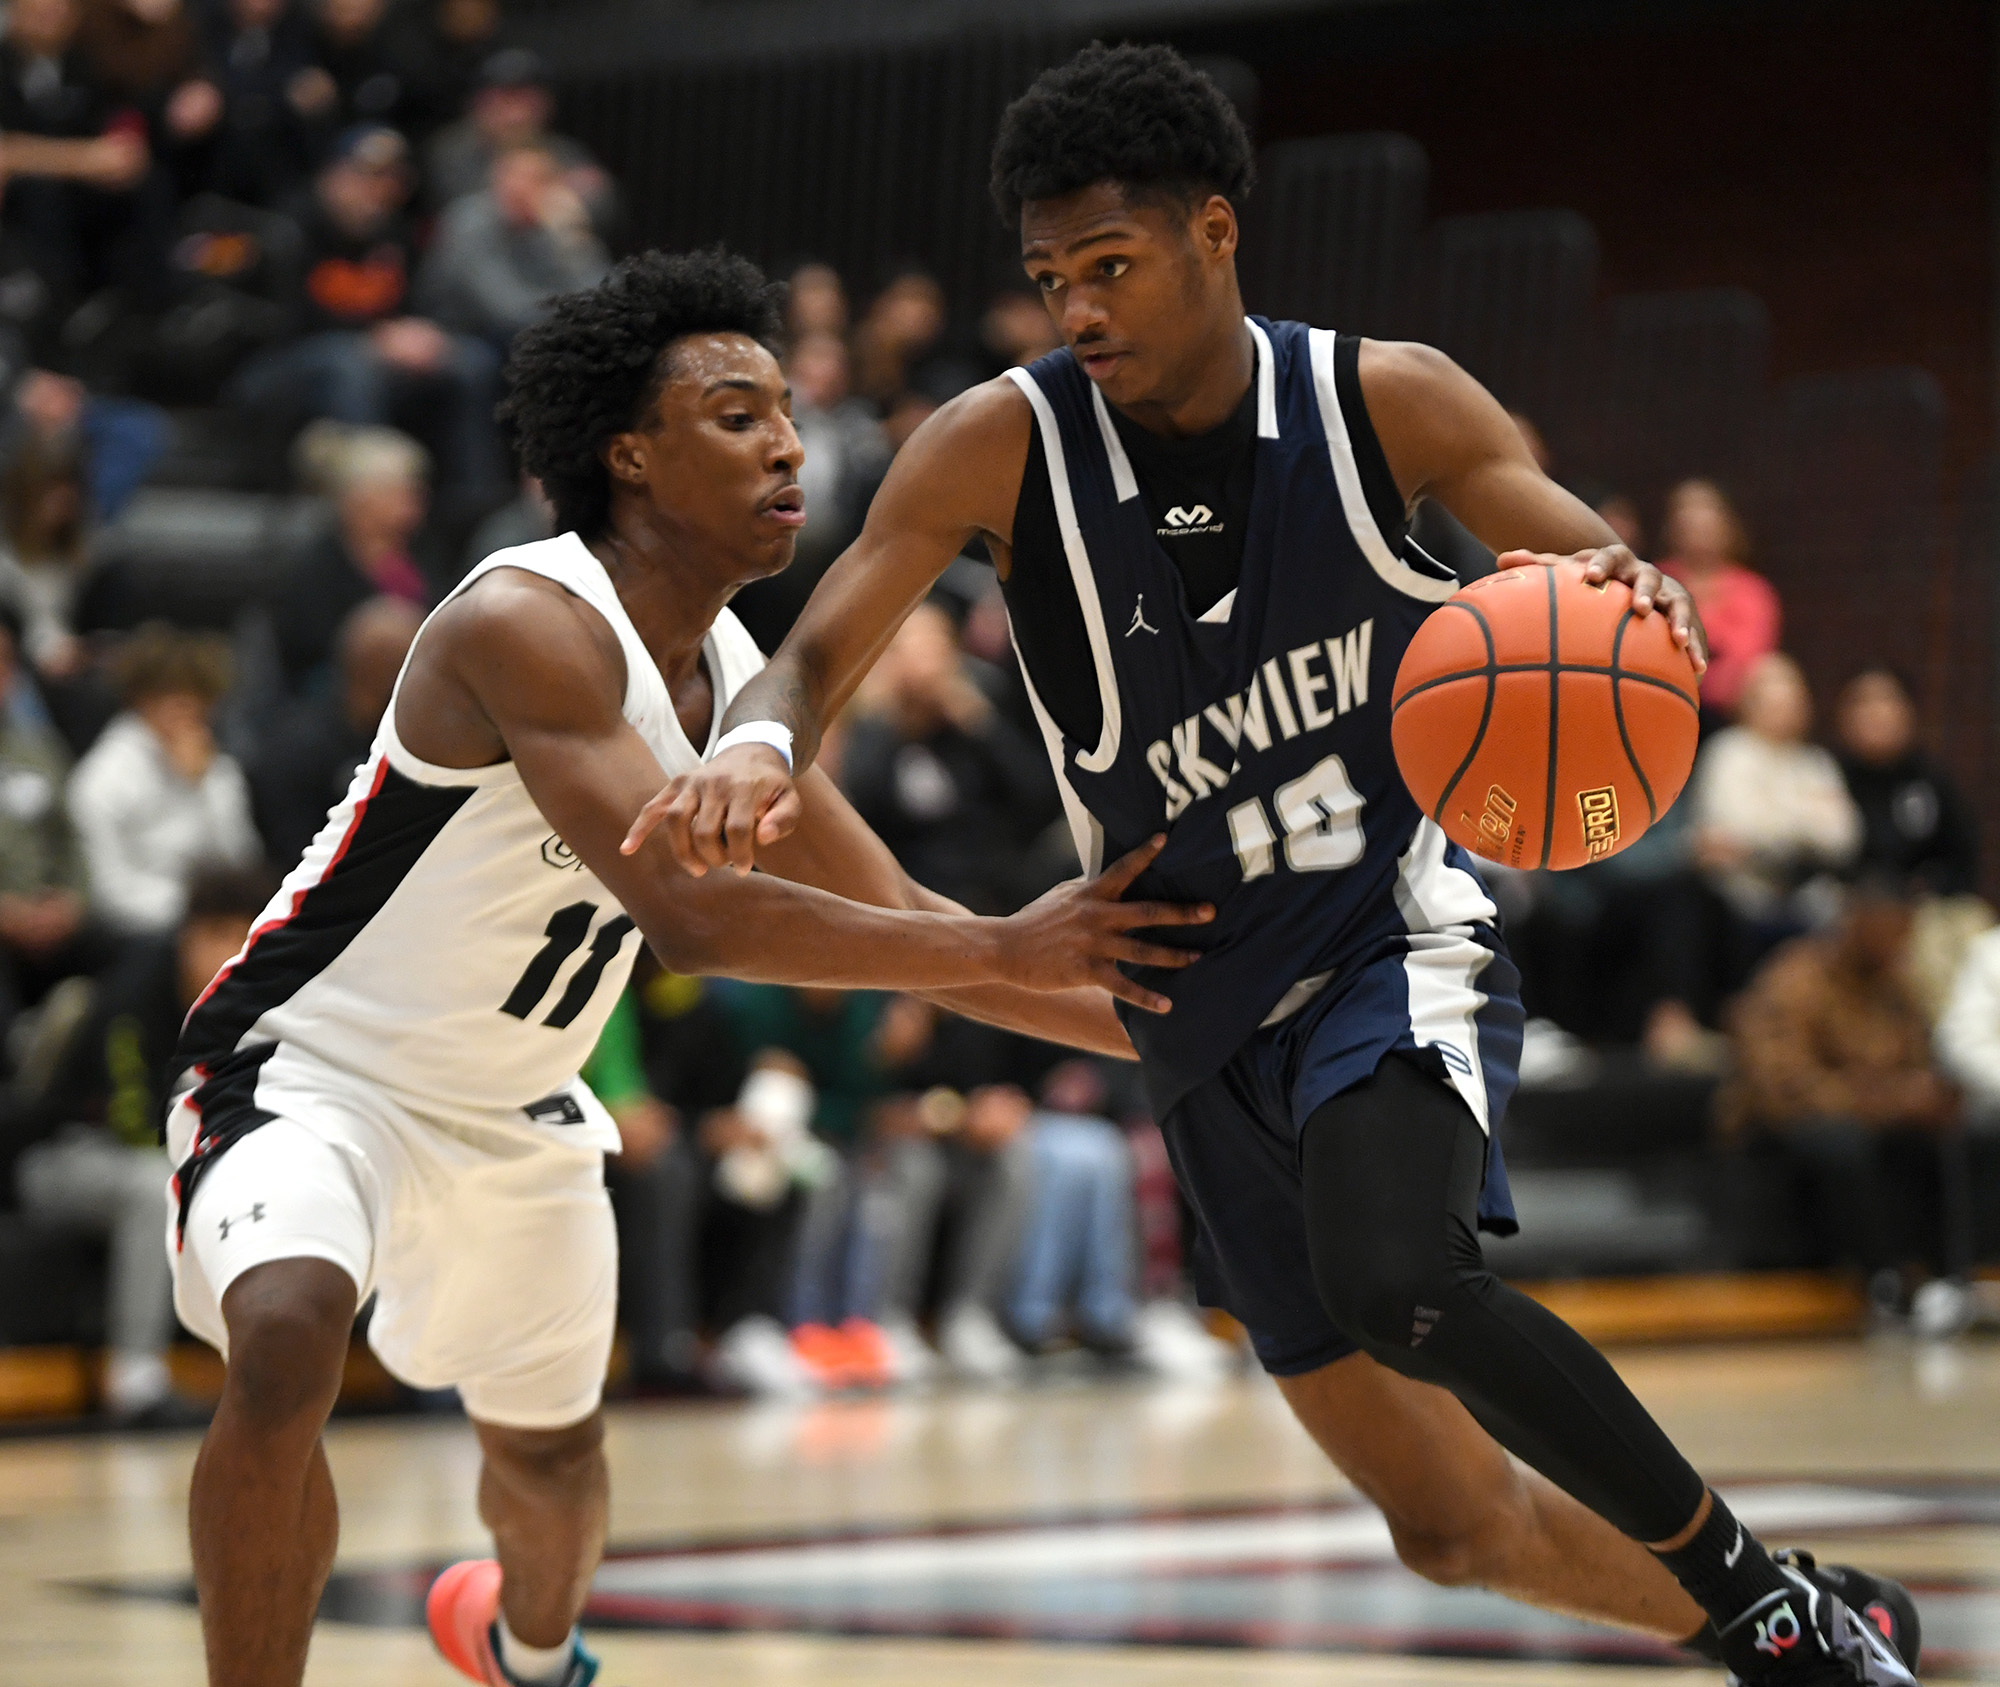 Boys Basketball: Skyview at Union photo gallery